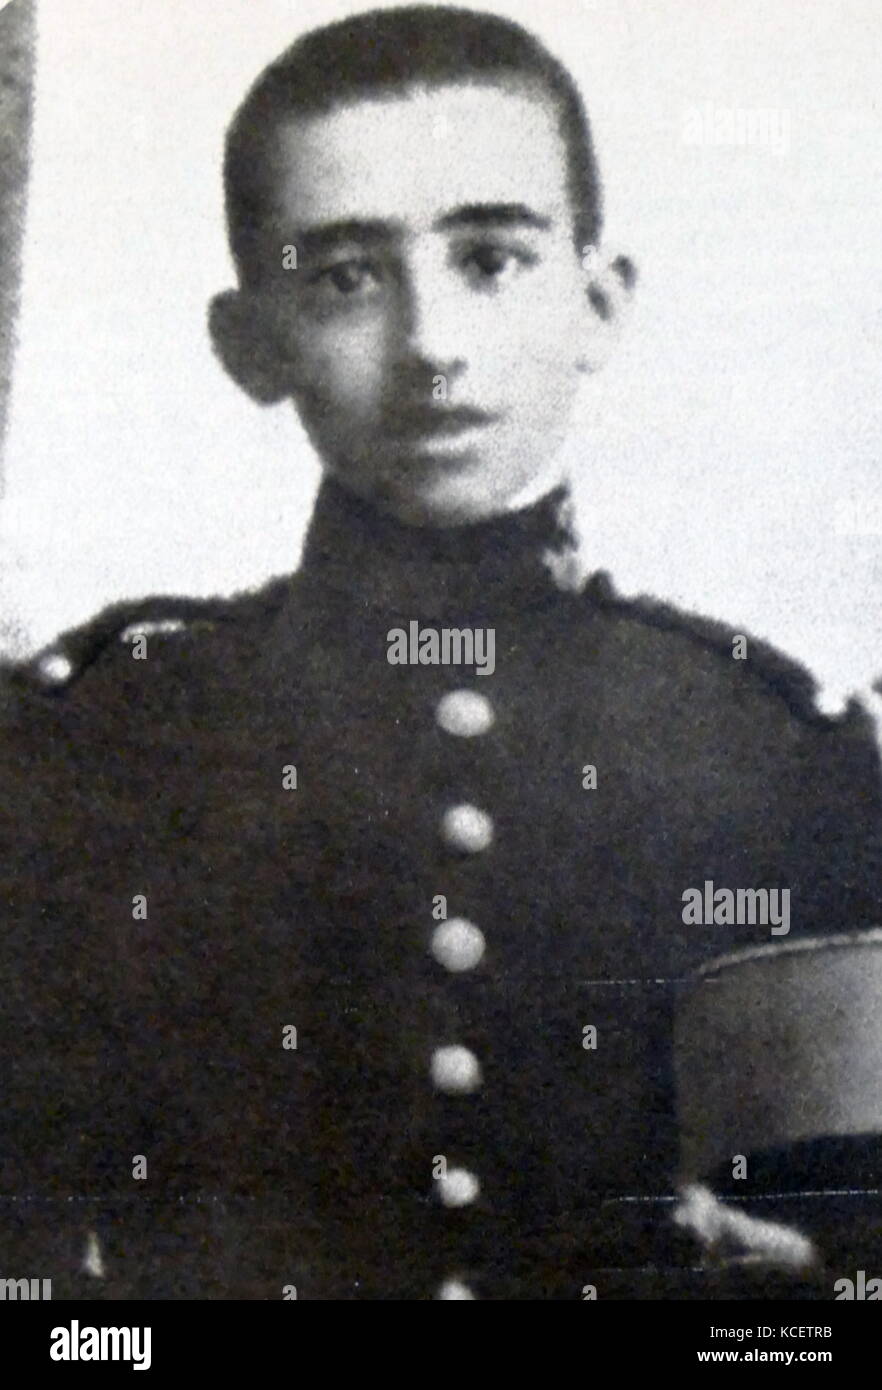 Francisco Franco Bahamonde (1892 – 1975) as a military cadet circa 1902. Franco was a Spanish general, in 1936. Franco was the dictator and the Caudillo of Spain from 1939 until his death Stock Photo